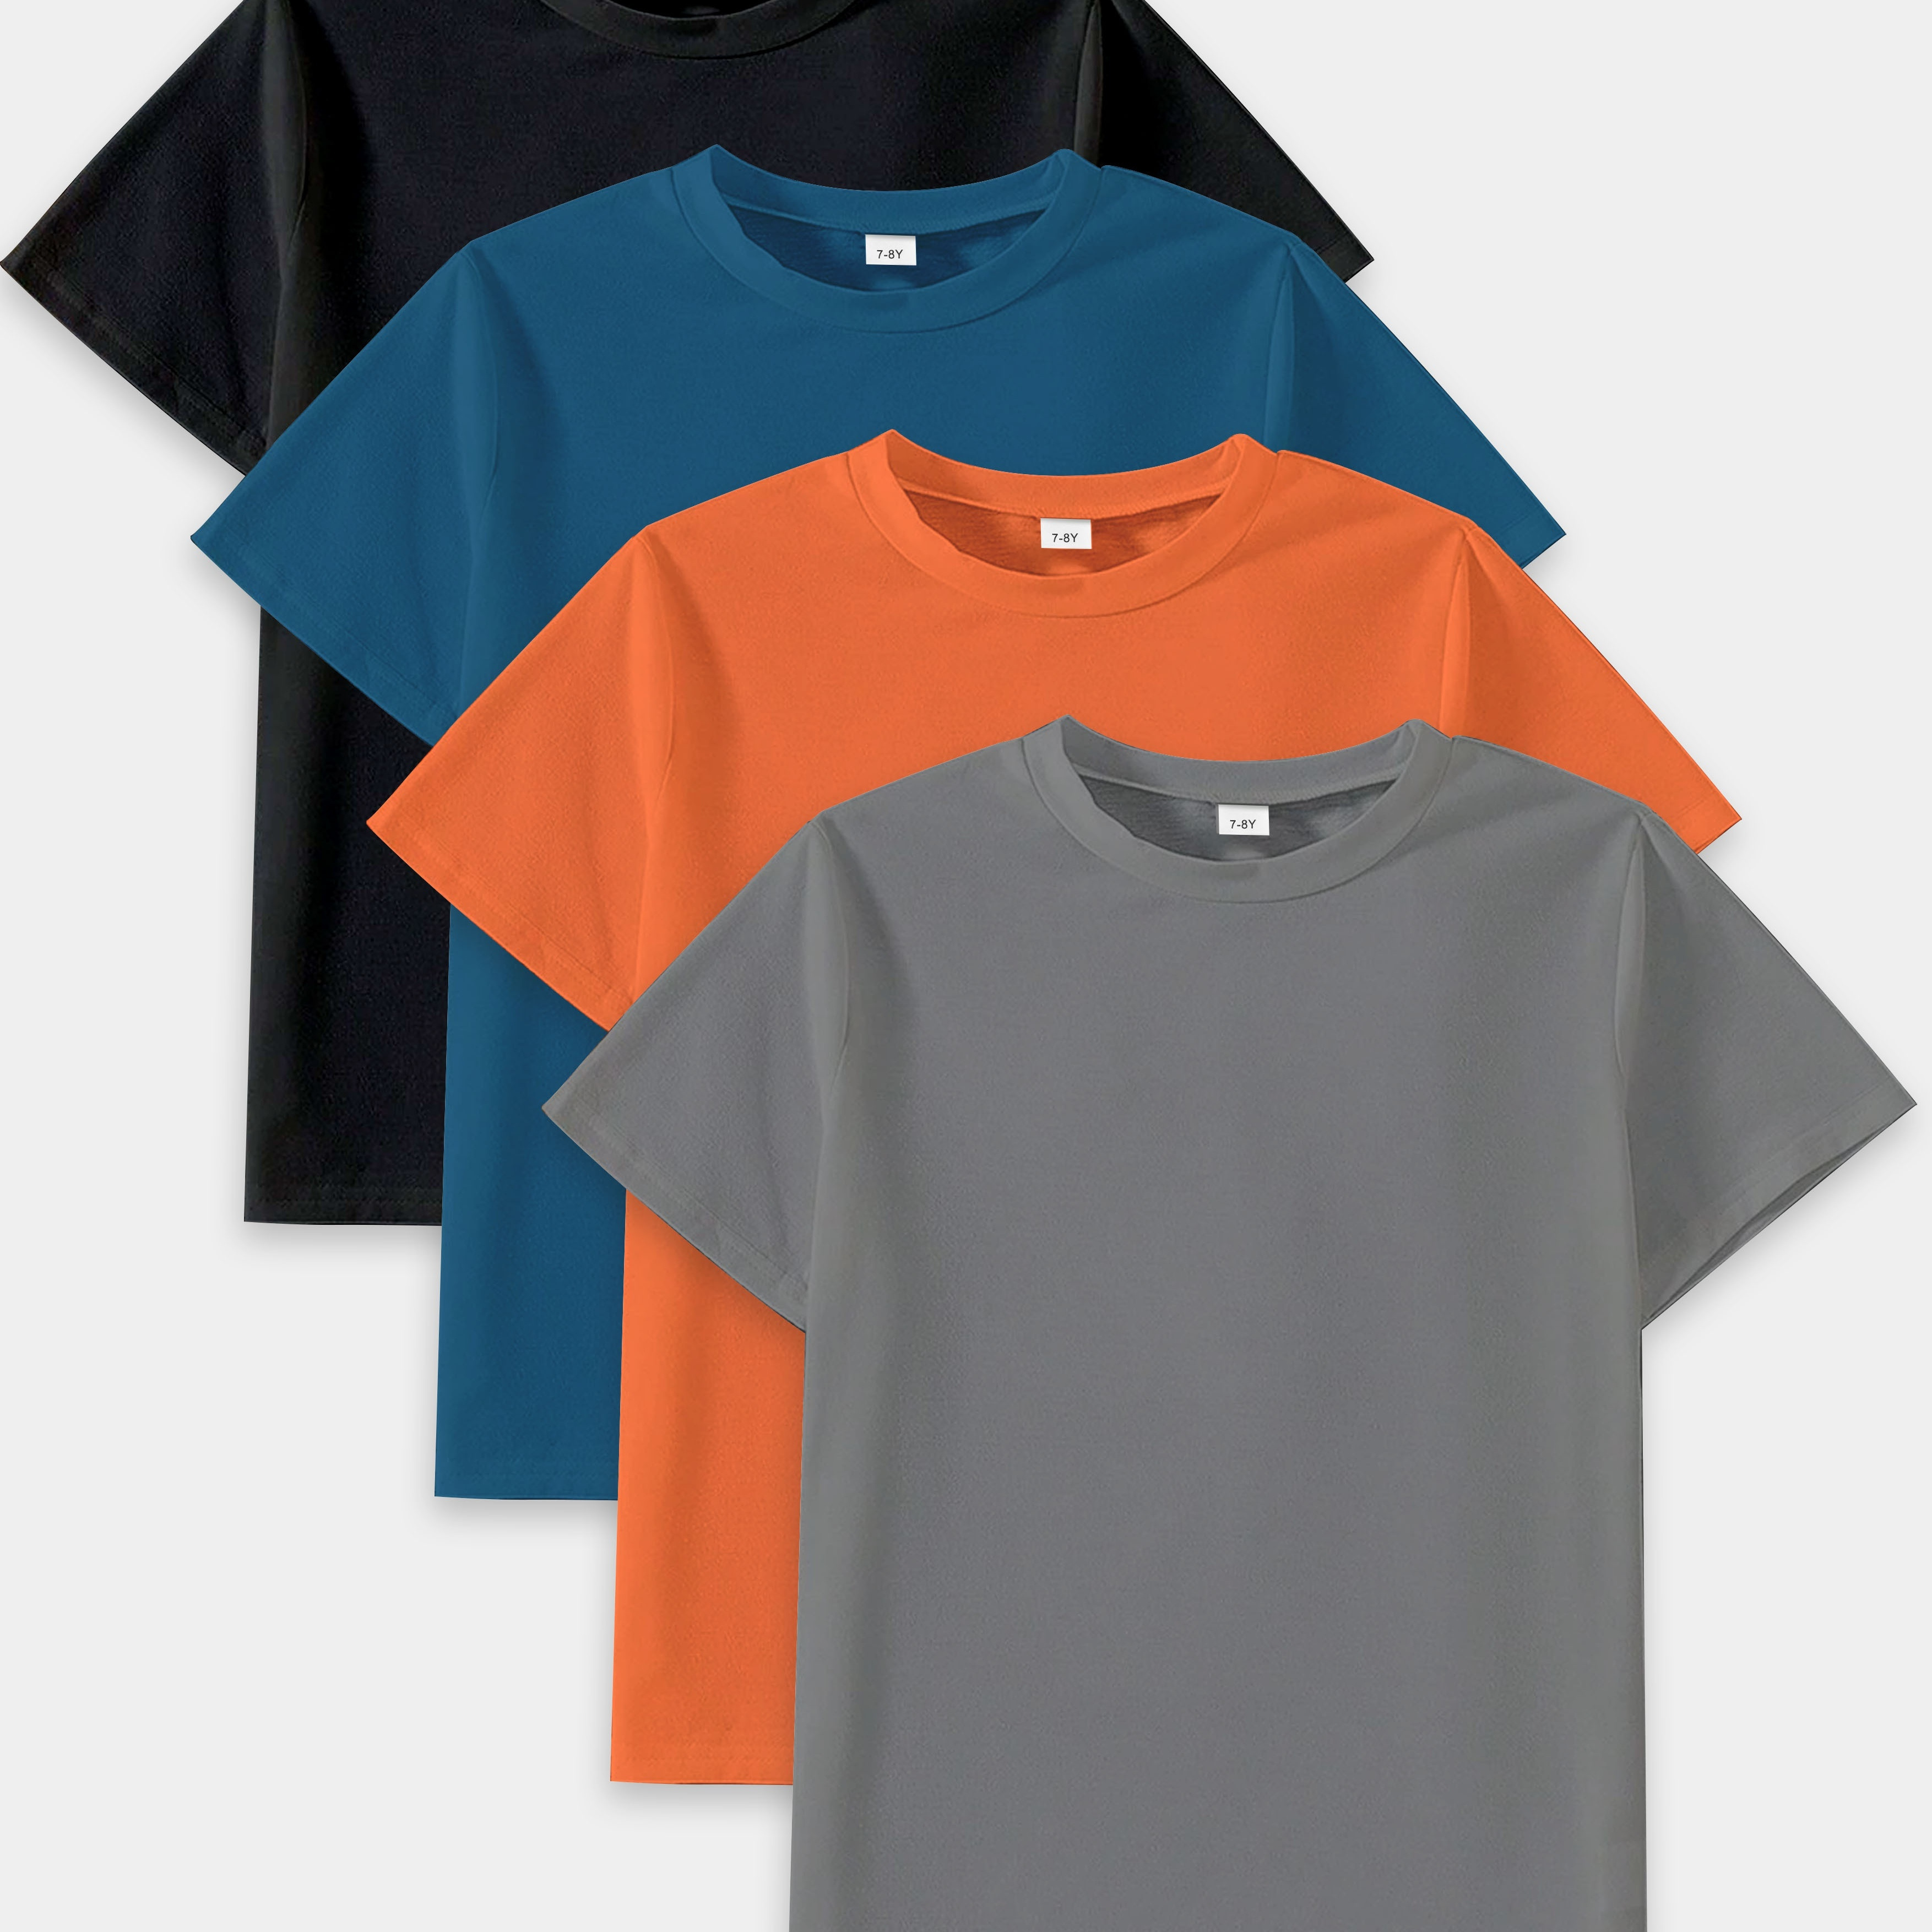 

4pcs Plain Color T-shirt, Tees For Boys, Casual Short Sleeve T-shirt For Summer Spring Fall, Tops As Gifts